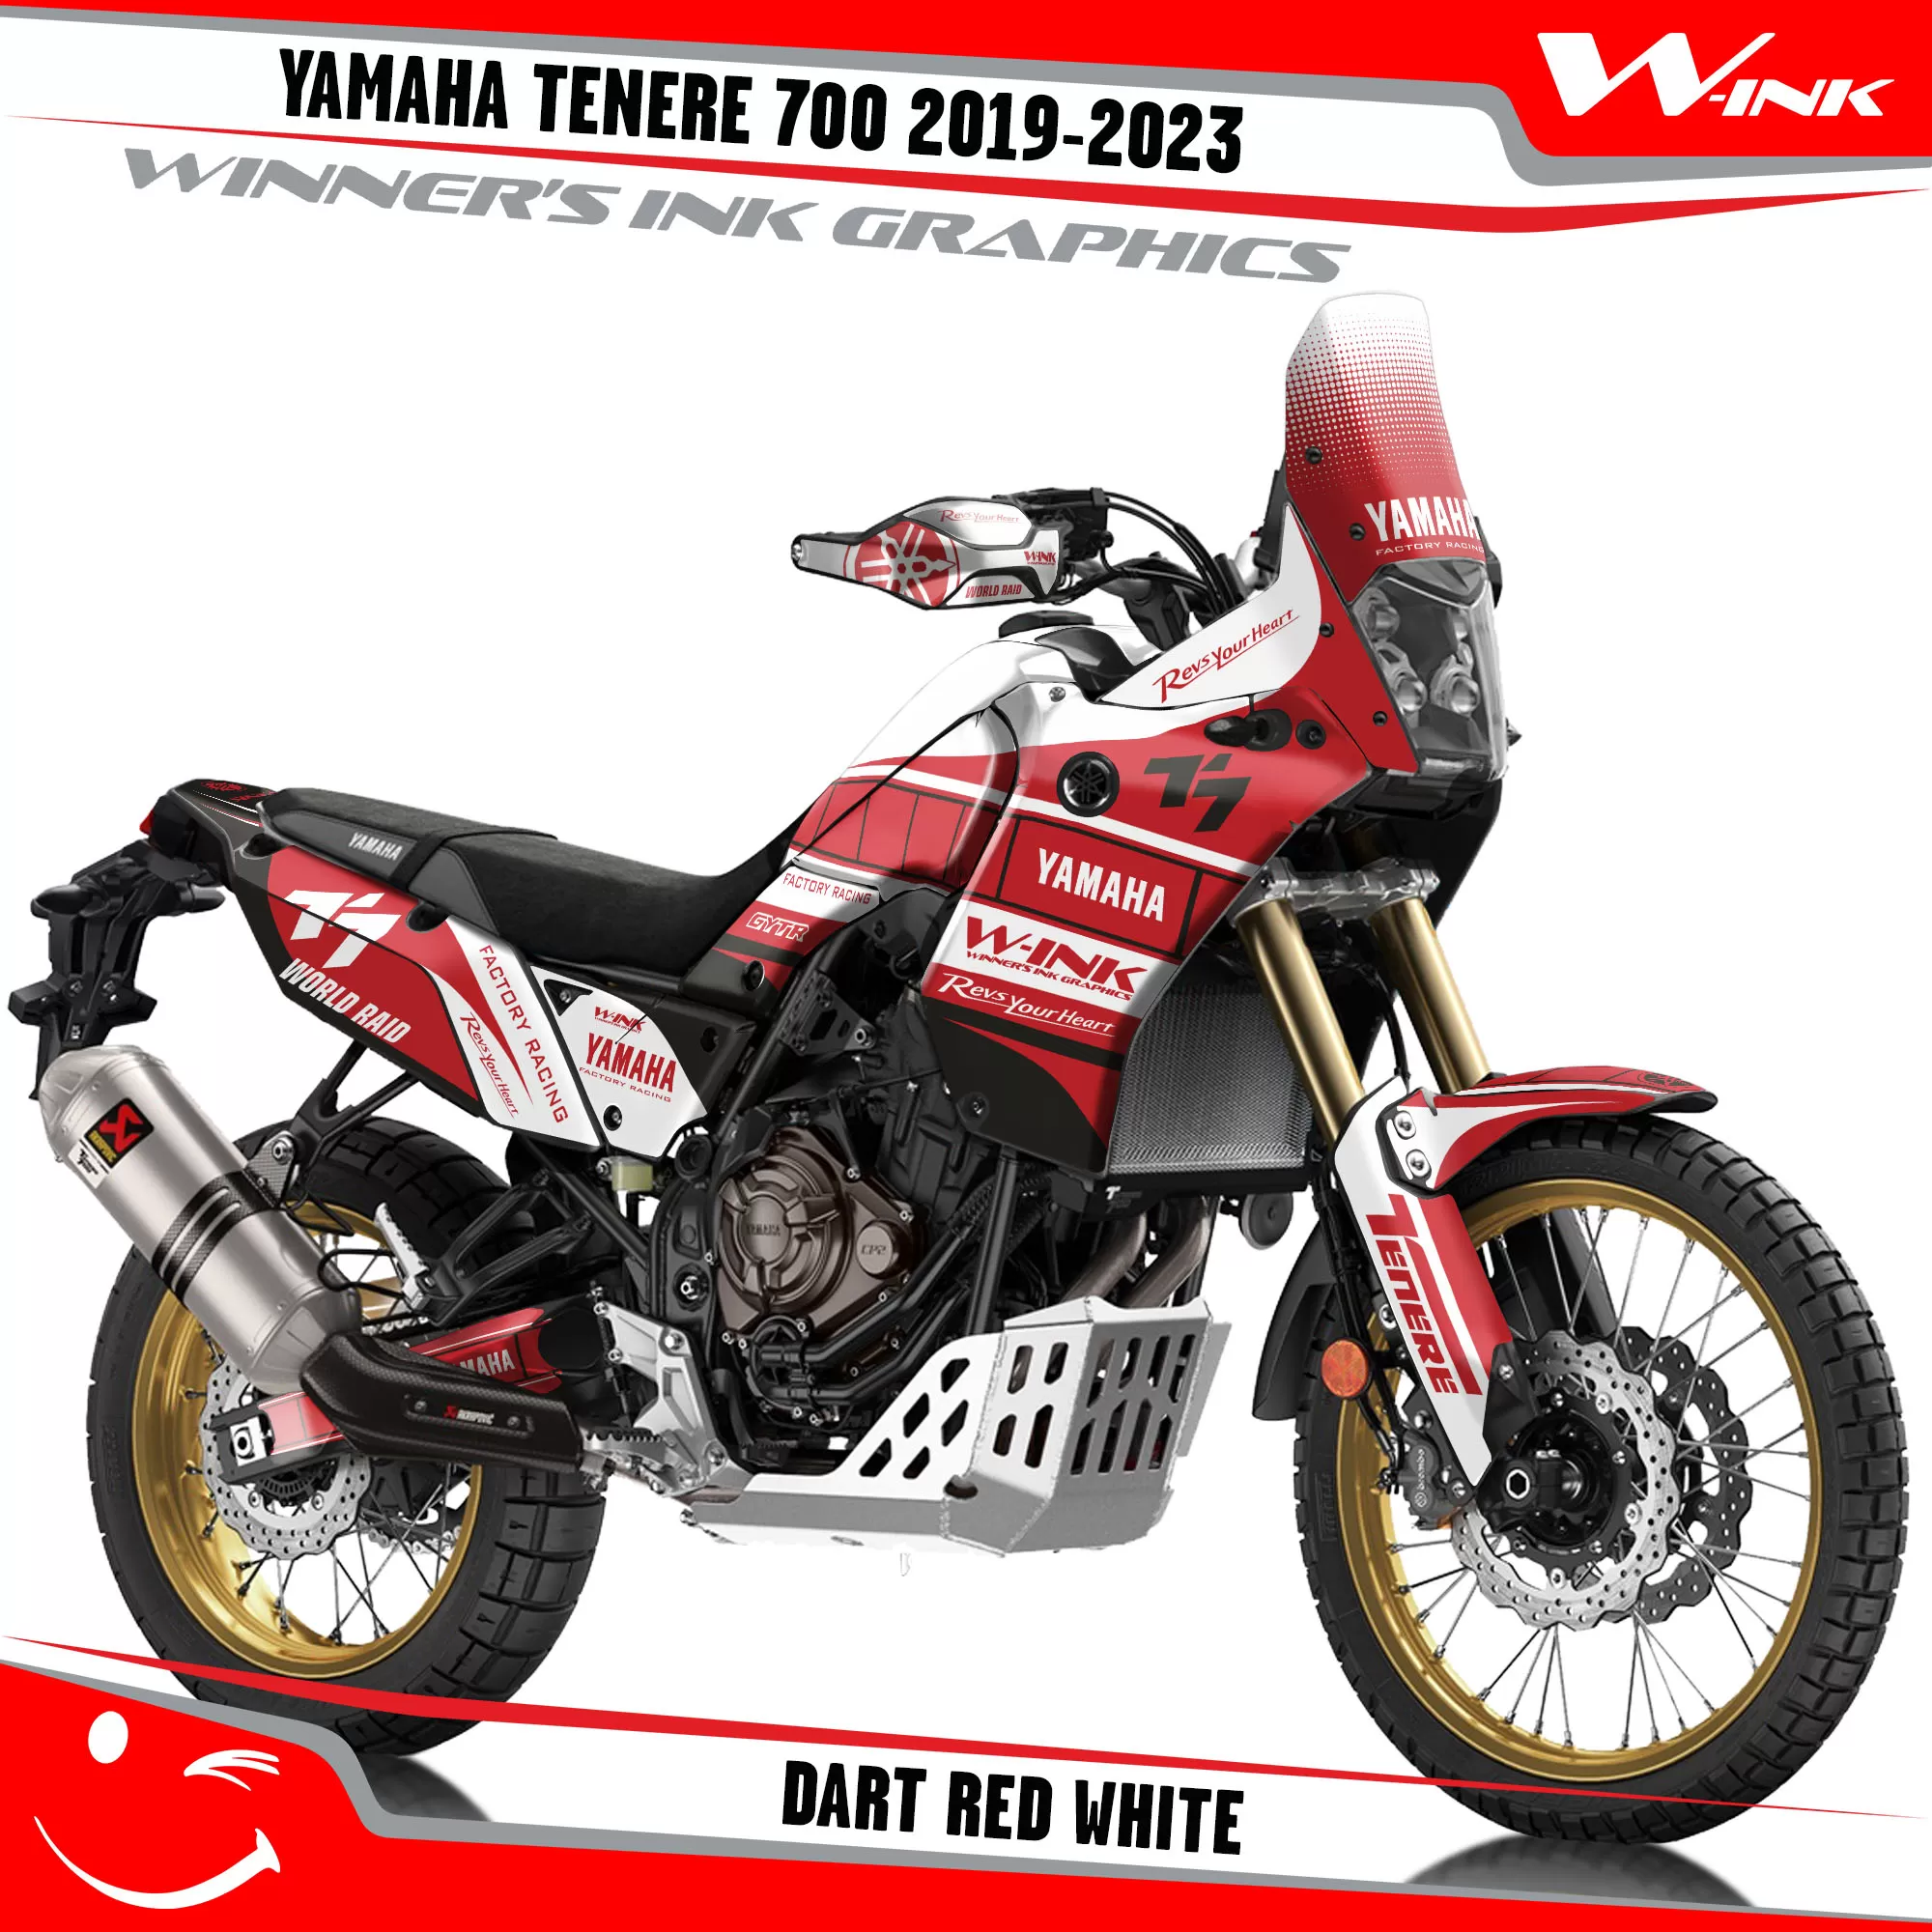 Yamaha-Tenere-700-2019-2020-2021-2022-2023-graphics-kit-and-decals-with-desing-Dart-Red-White